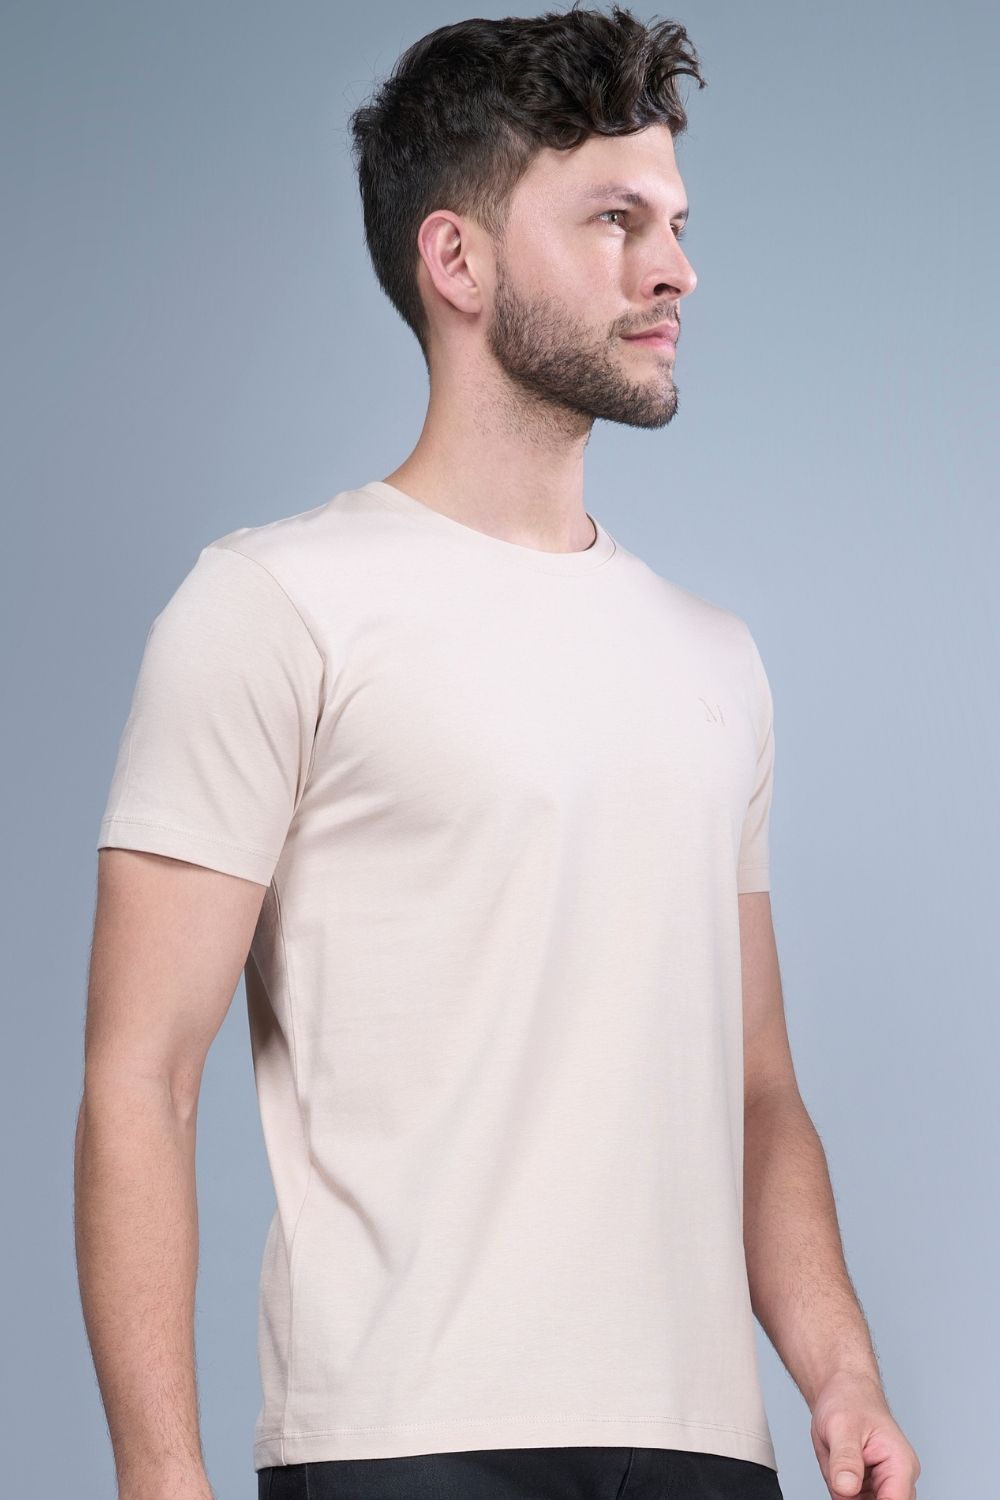 Solid T shirt for men in the color moon light with half sleeves and round neck, side view.